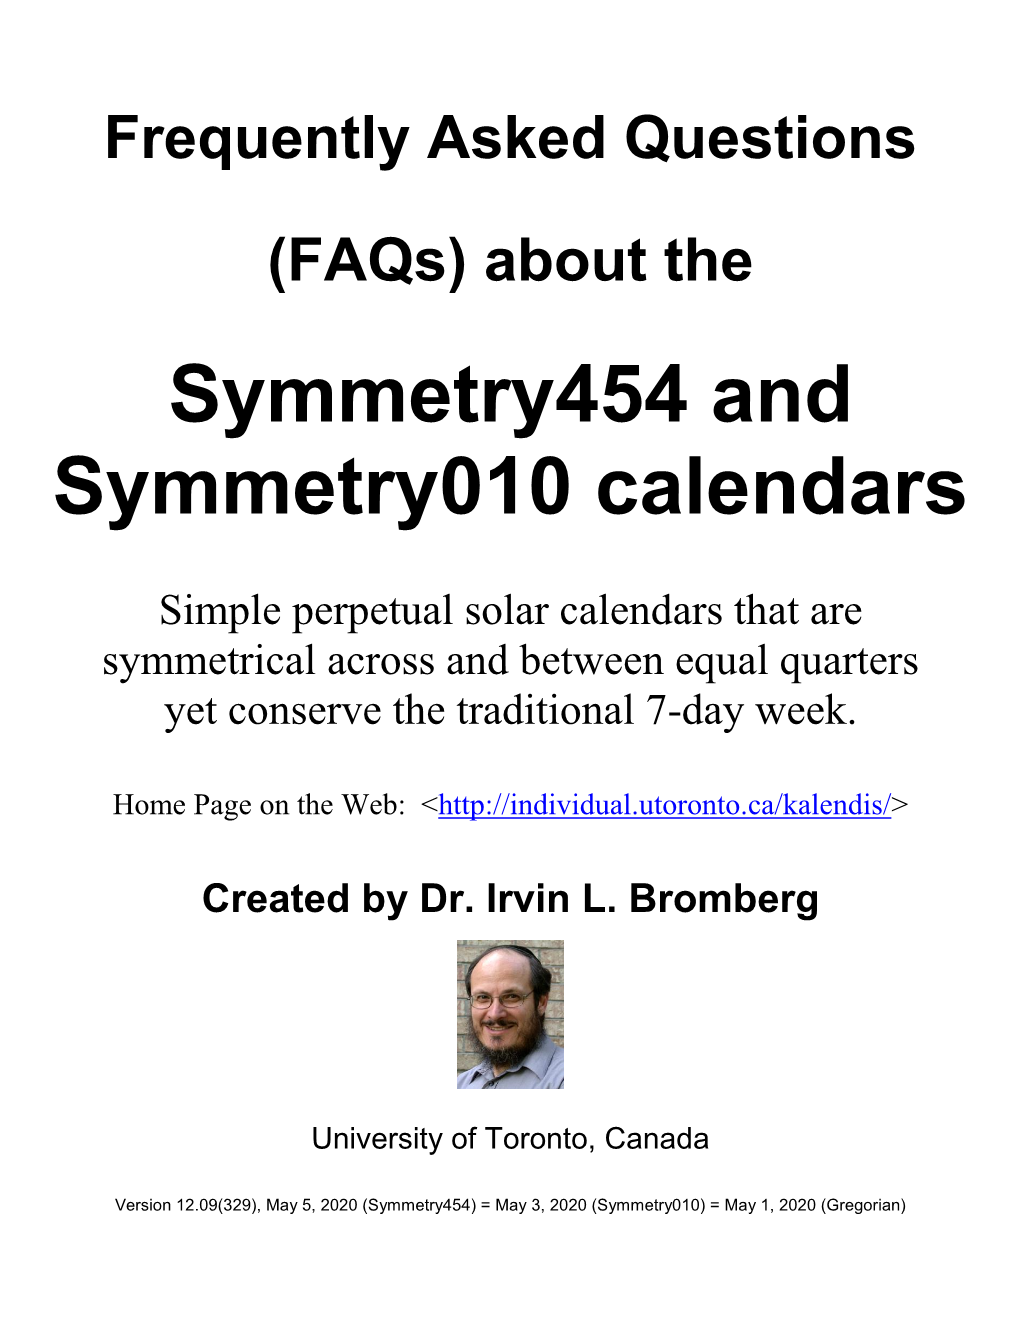 Symmetry454 and Symmetry010 Calendar Faqs Page 2 of 17